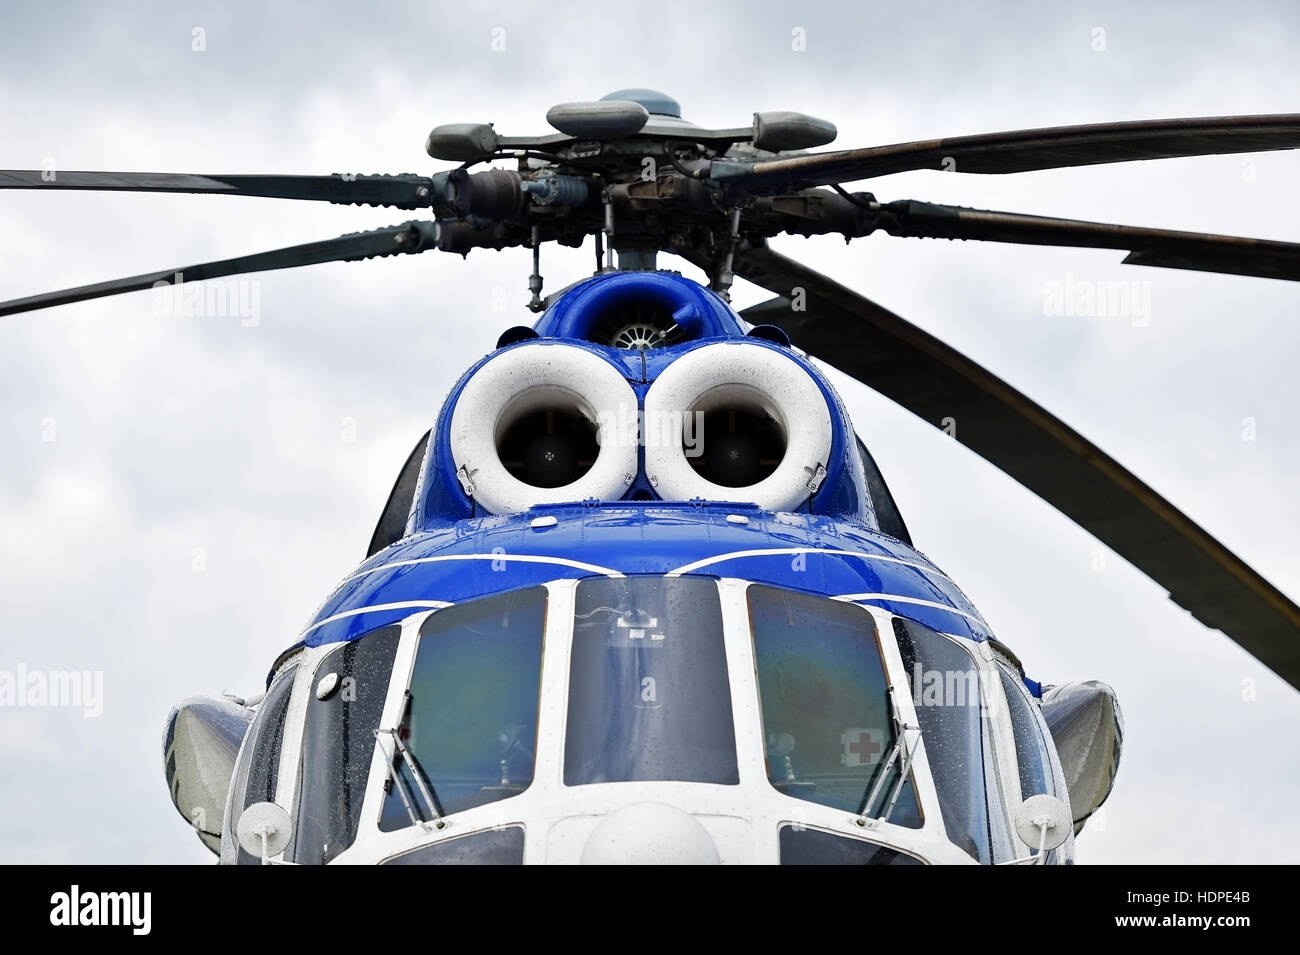 Detail with helicopter fuselage and rotor blade system Stock Photo